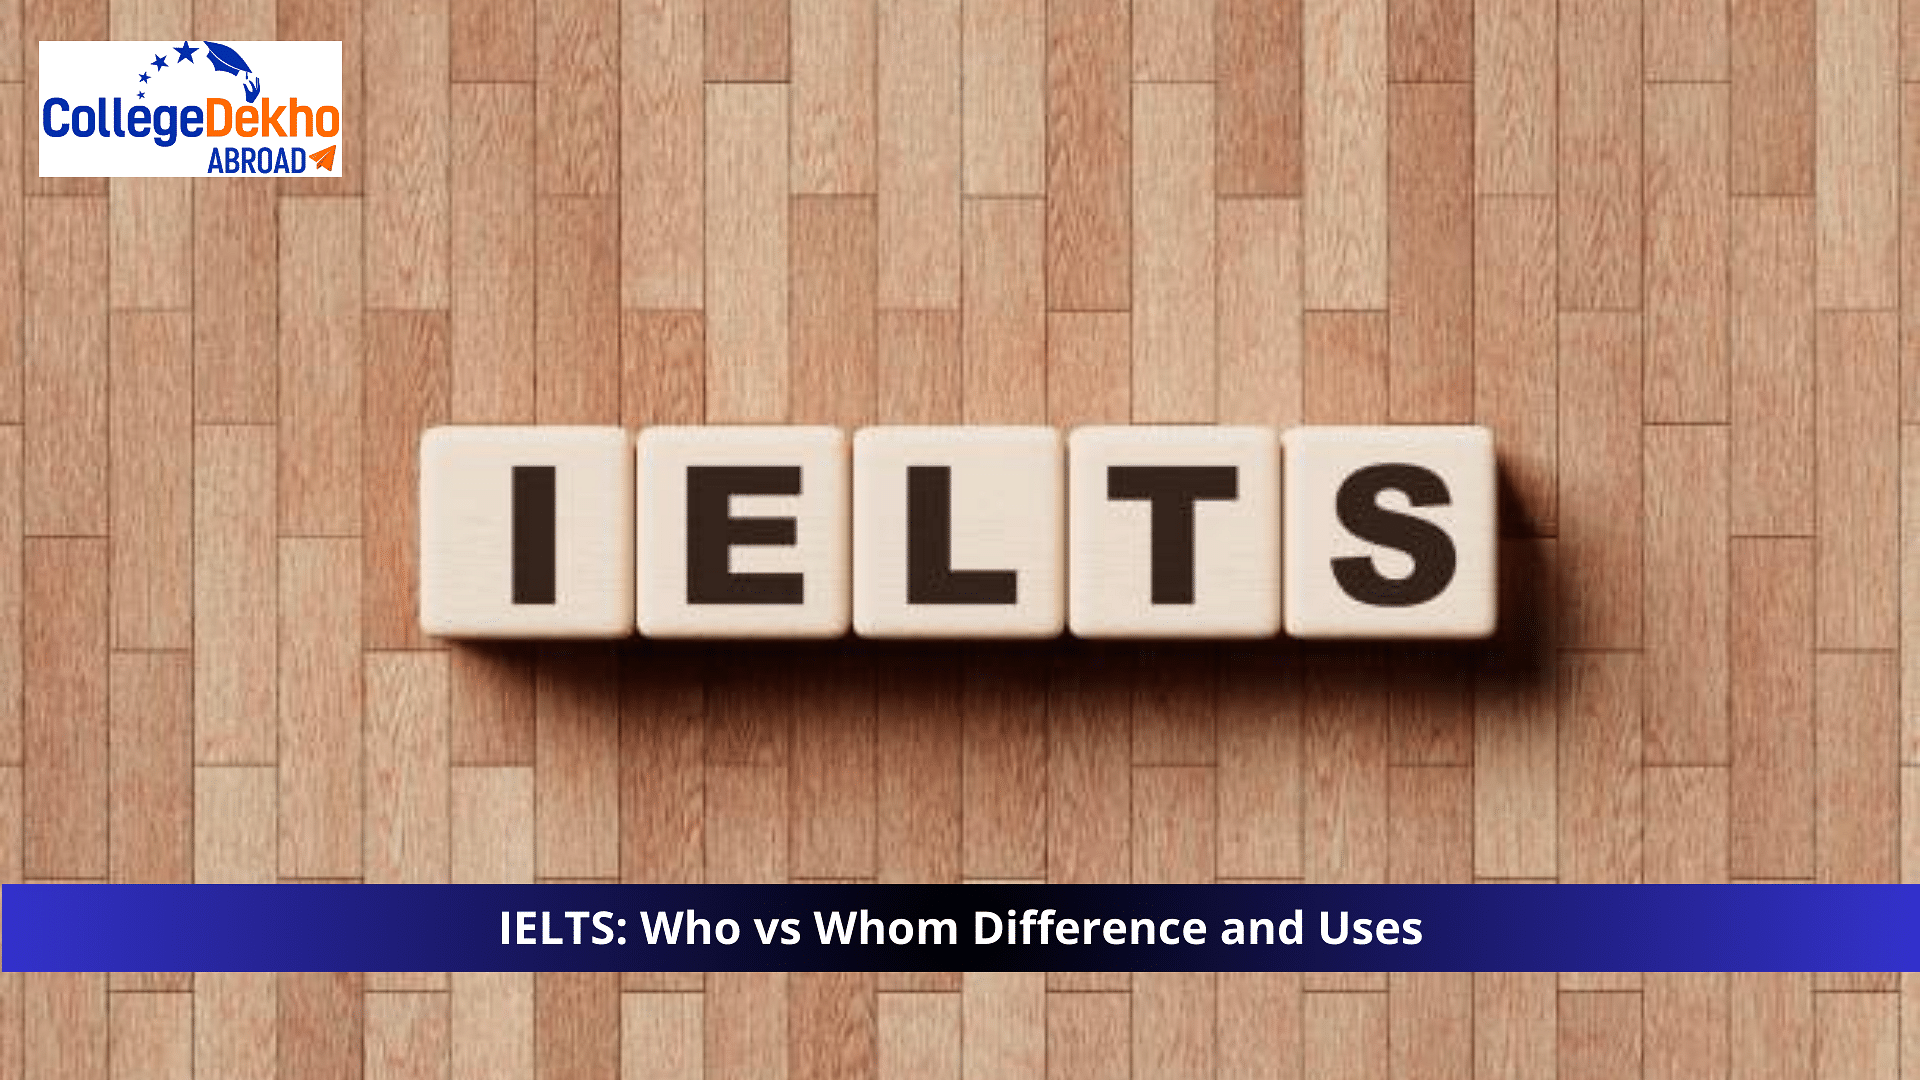 IELTS: Who vs Whom Difference and Uses